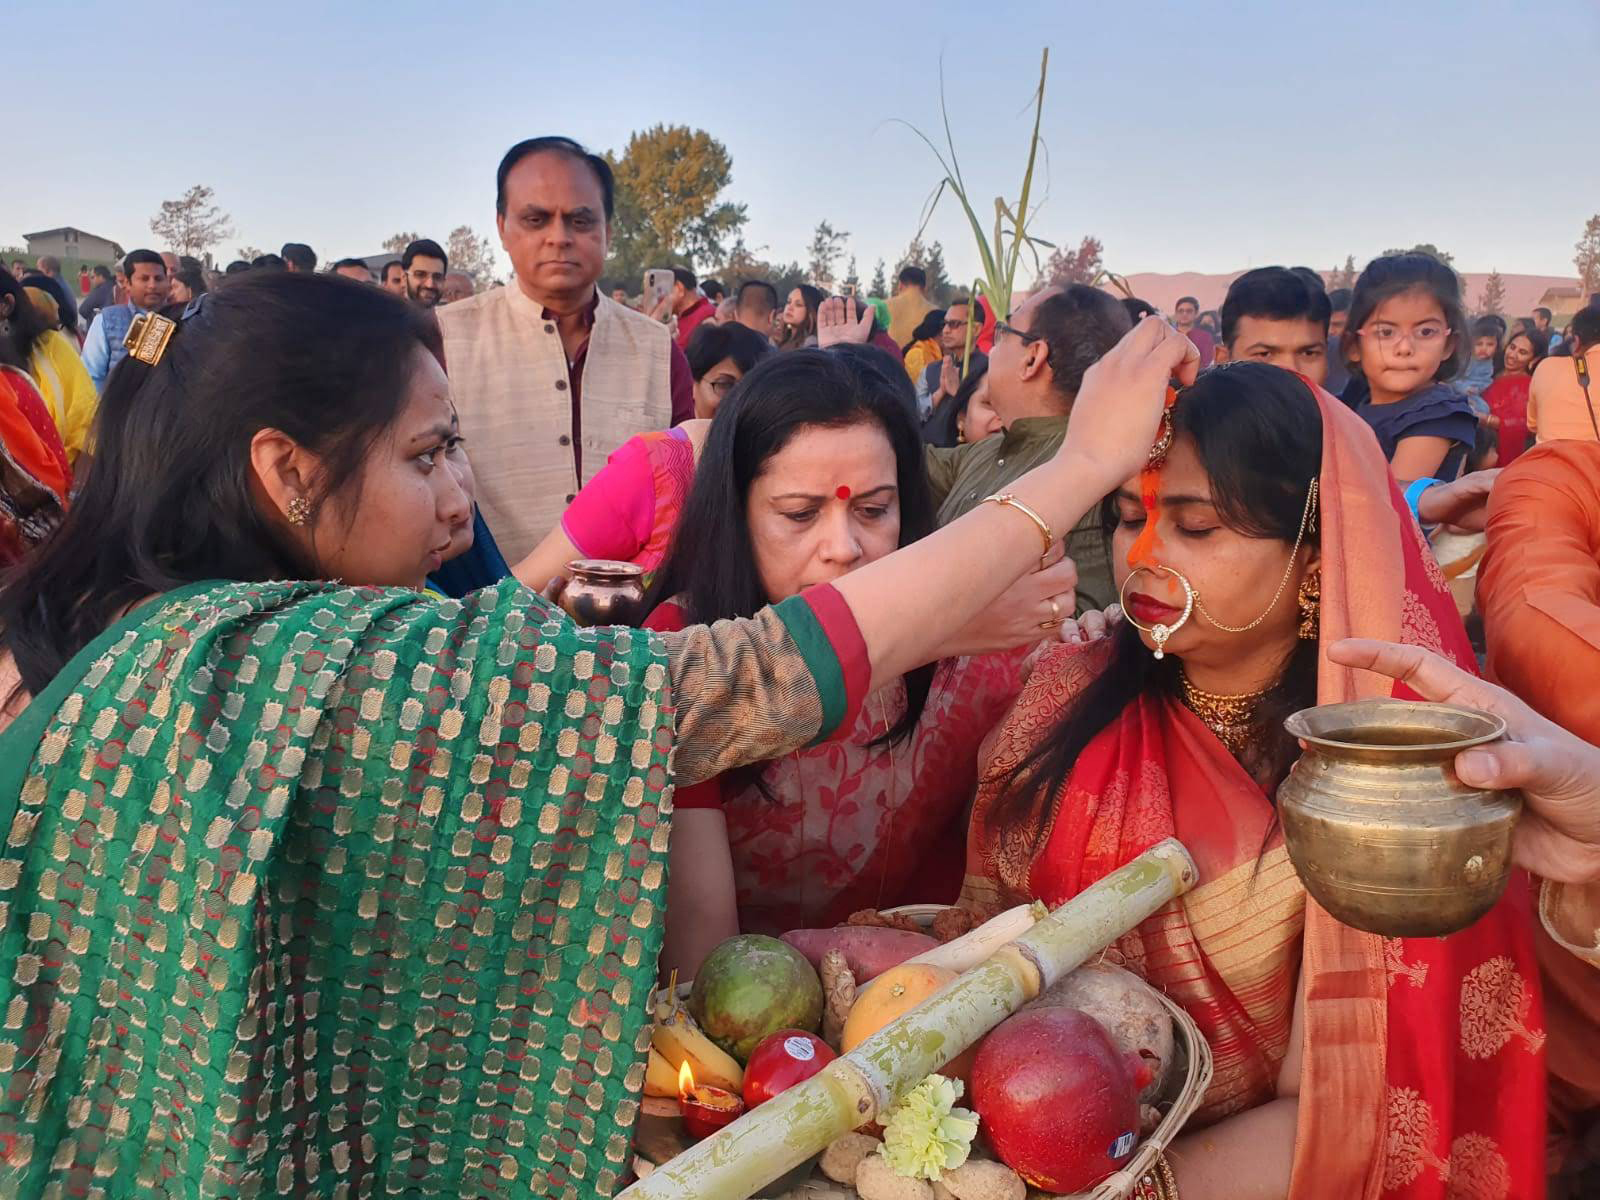 Manisha Pathak, right, prepares to offer Chhath puja prayers at Quarry Lakes Regional Recreation Area in Fremont, California, in Nov. 2019. (Photo courtesy Sunil and Shalini Singh)